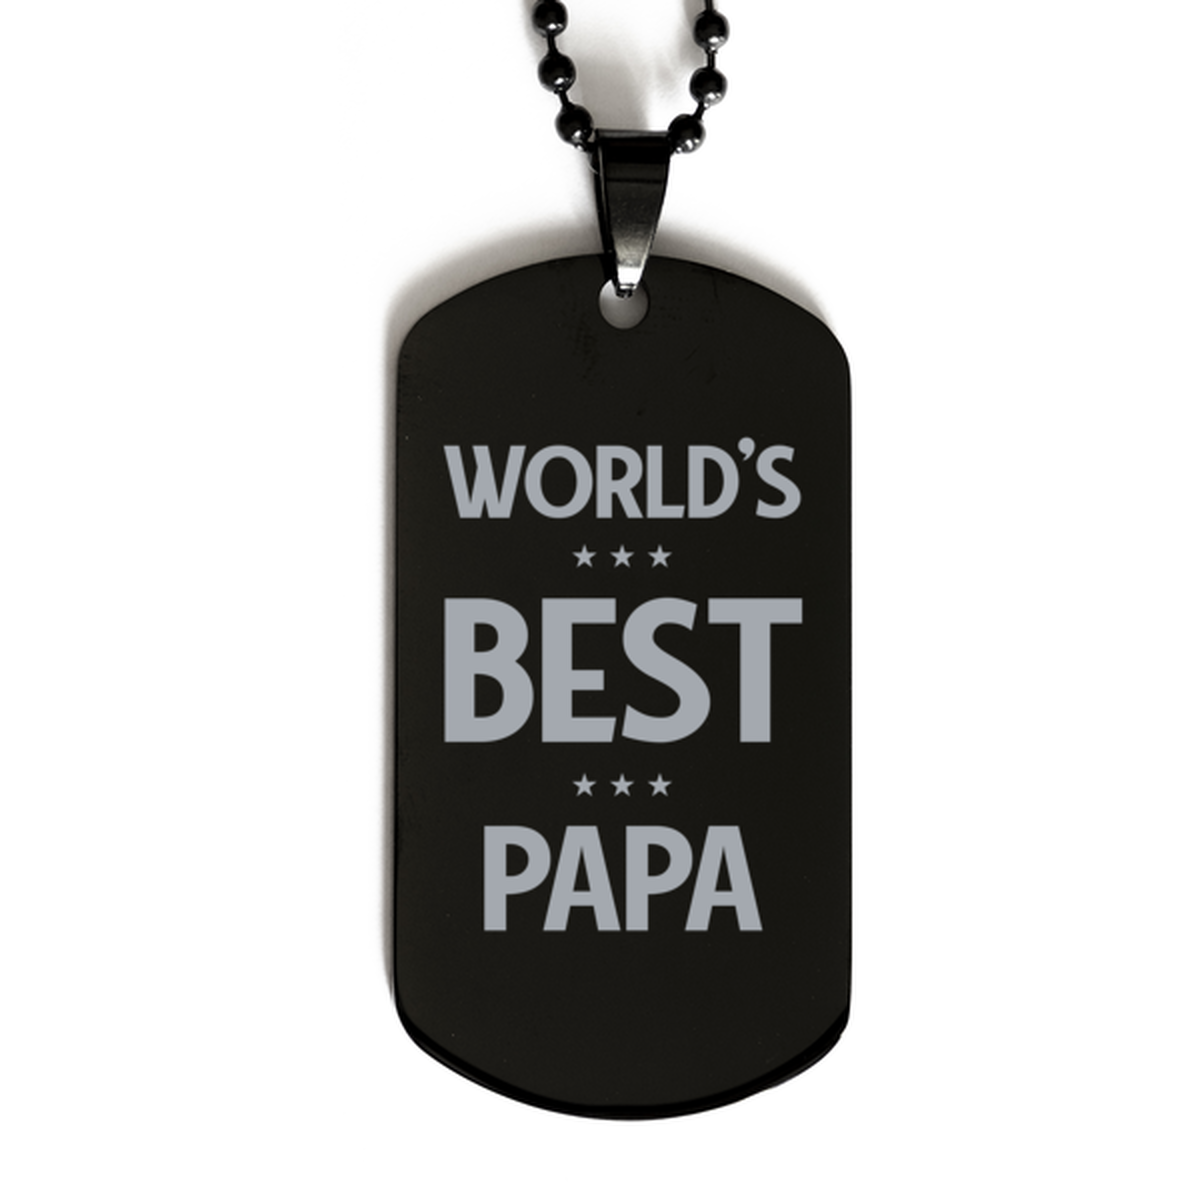 Worlds Best Papa Gifts, Funny Black Engraved Dog Tag For Papa, Birthday Presents For Men